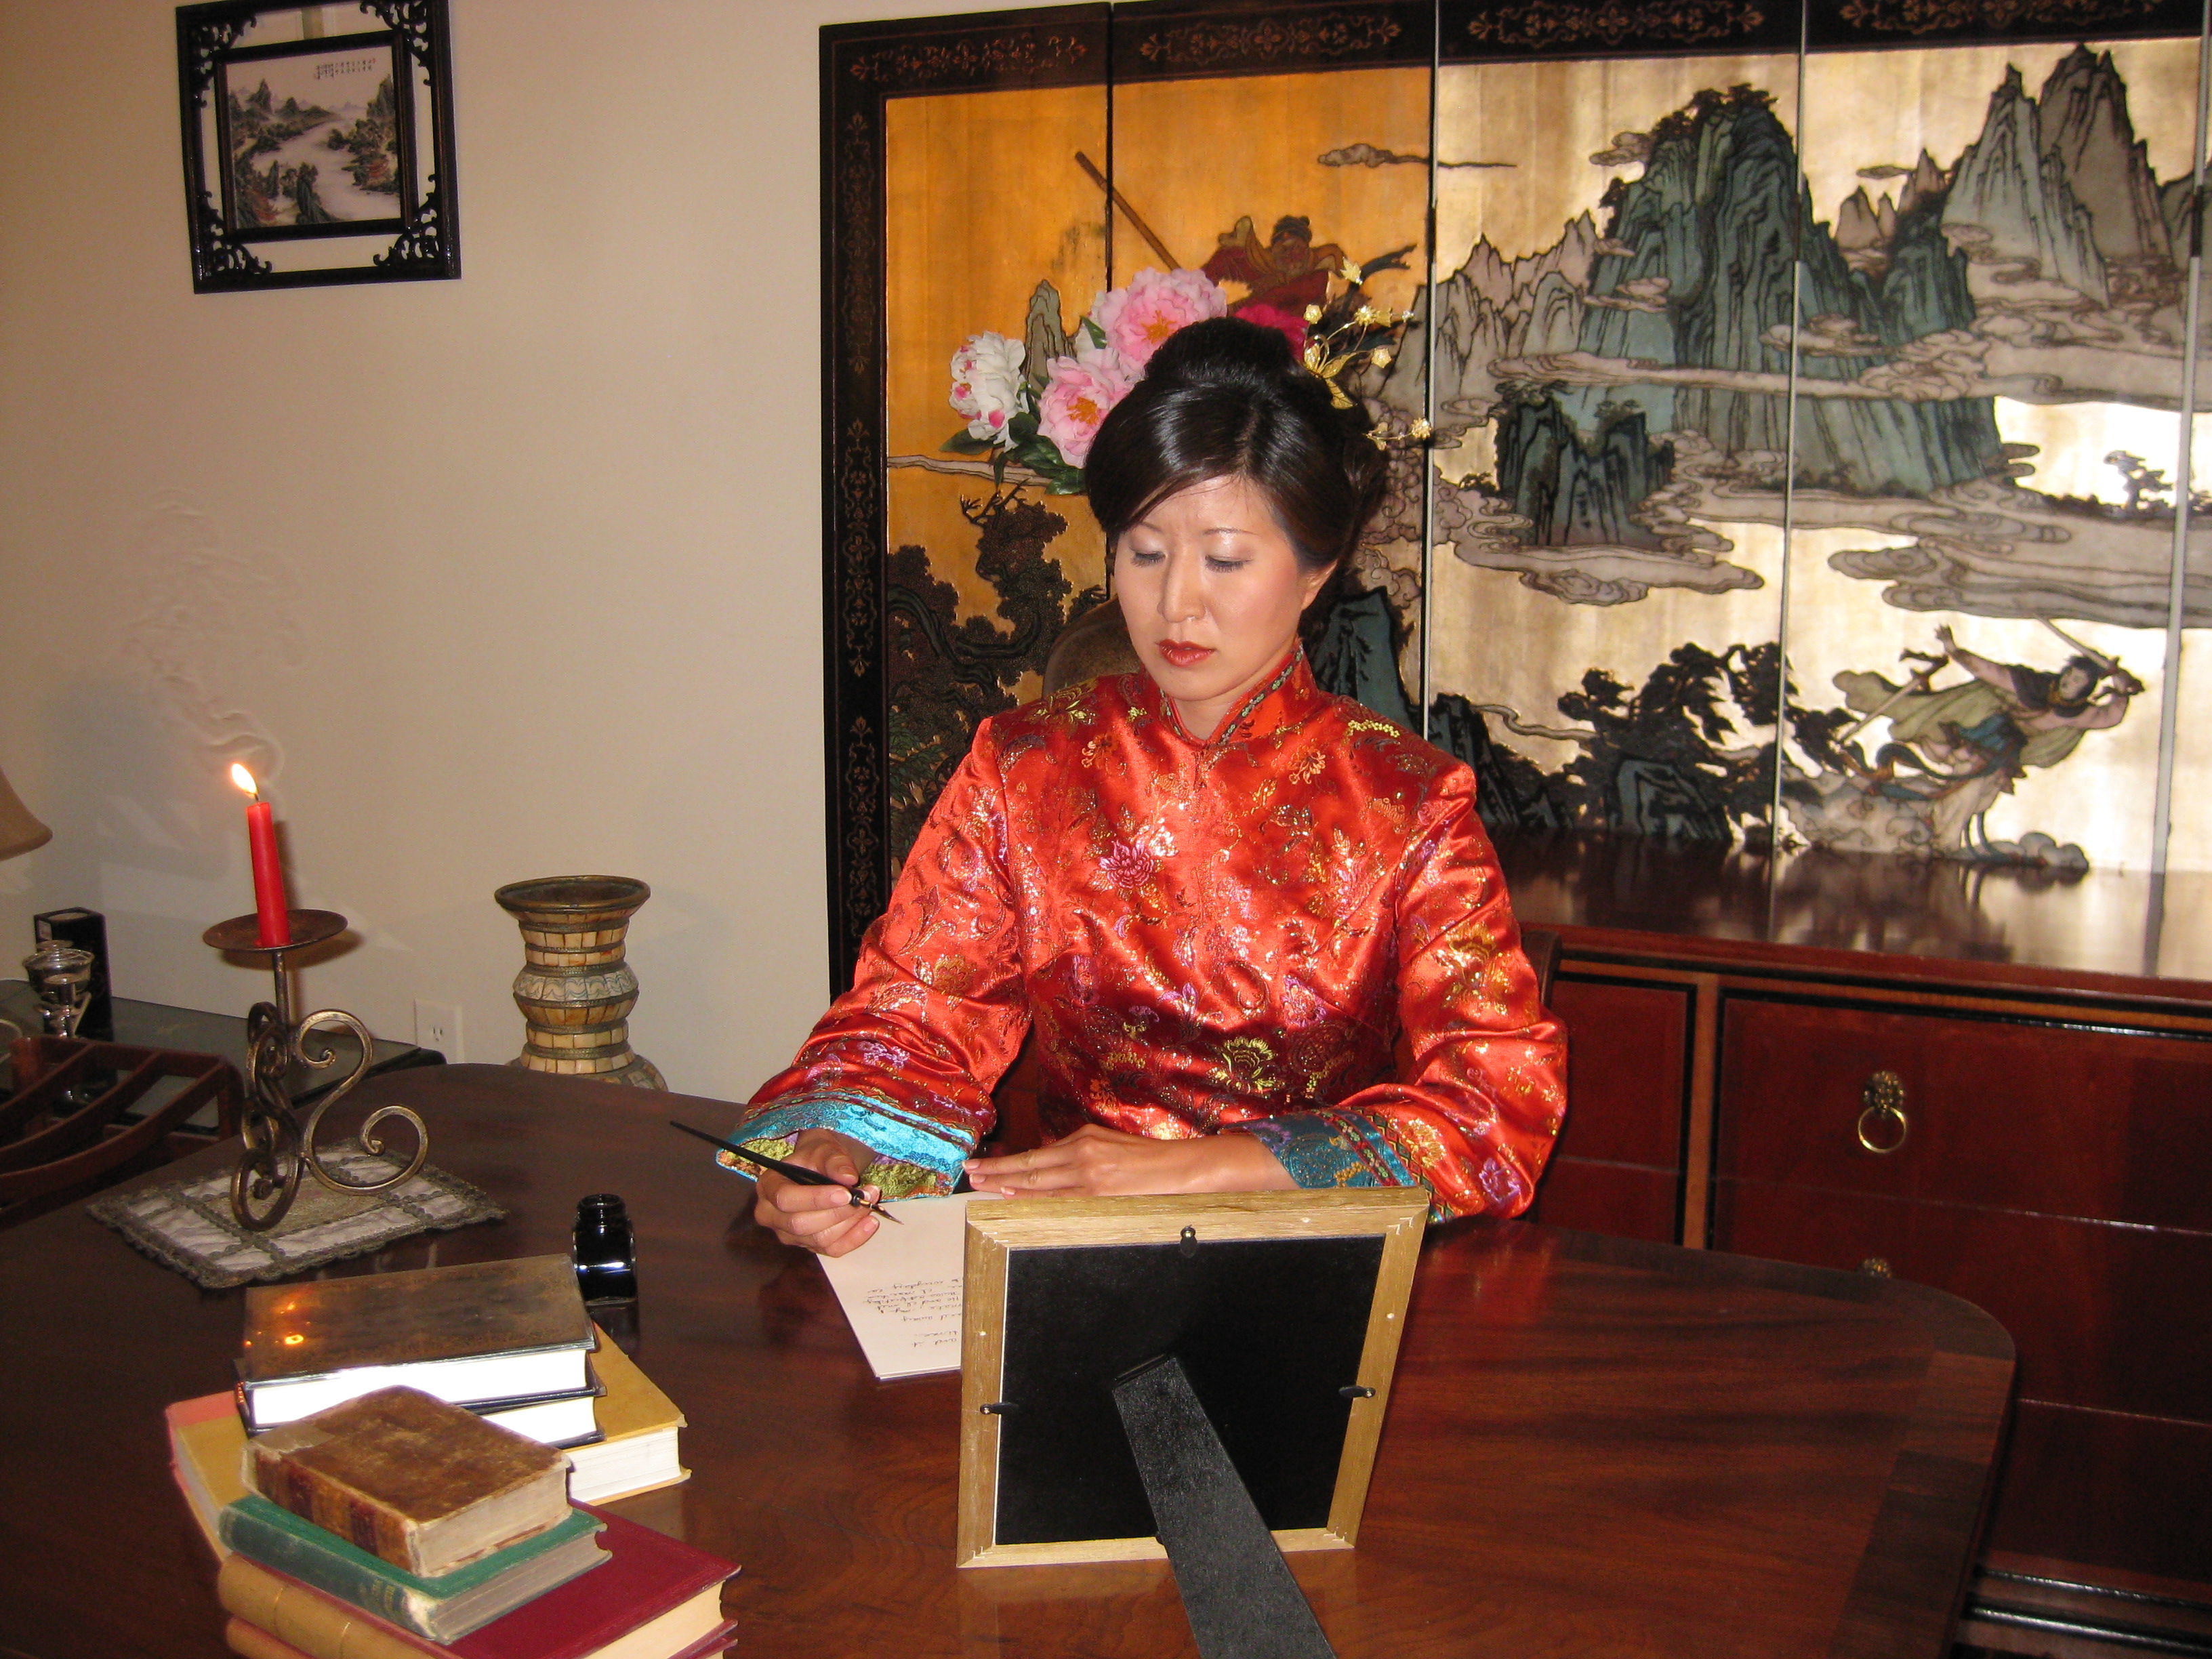 Lil Rhee as Princess Der Ling, writing at the desk